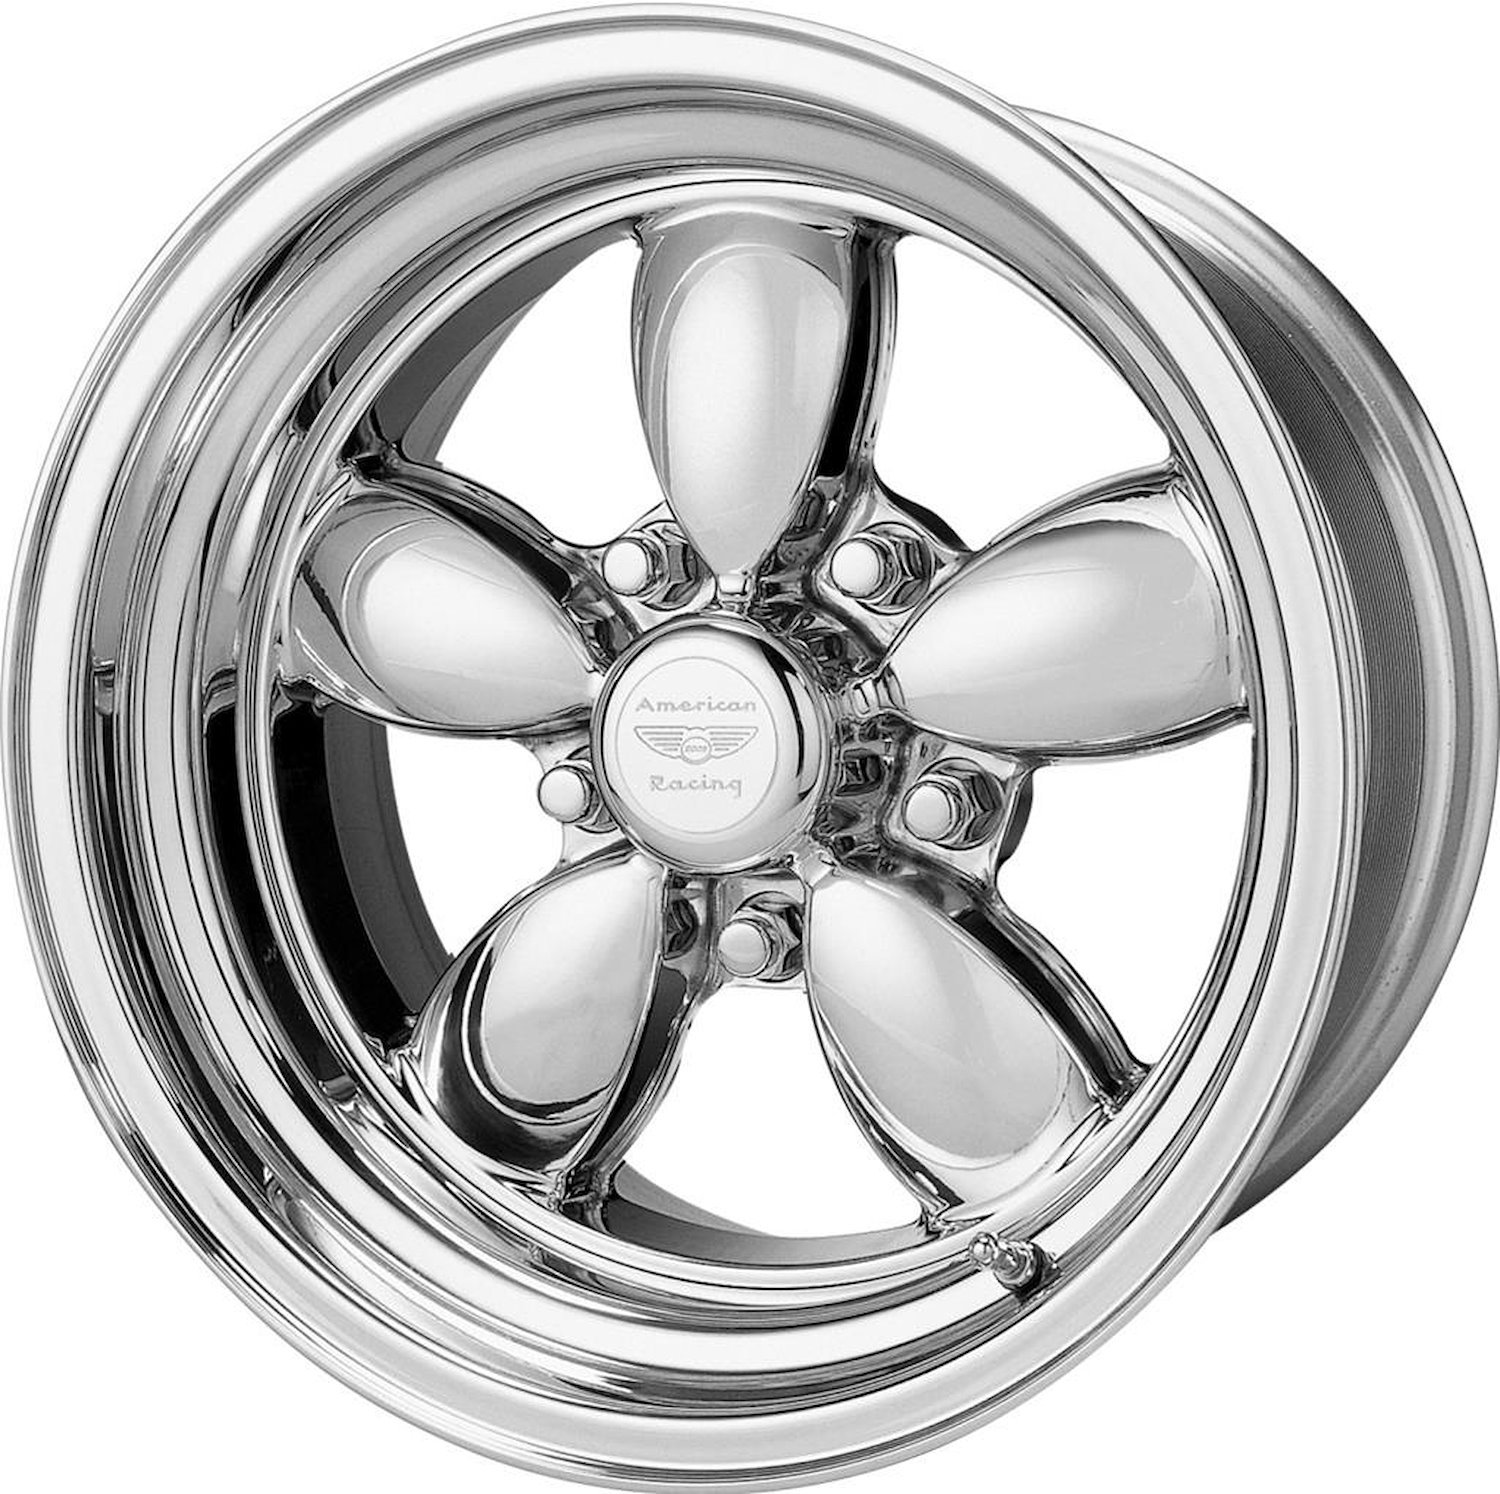 AMERICAN RACING CLASSIC 200S TWO-PIECE POLISHED 17 x 11 5X4.75 51 8.01